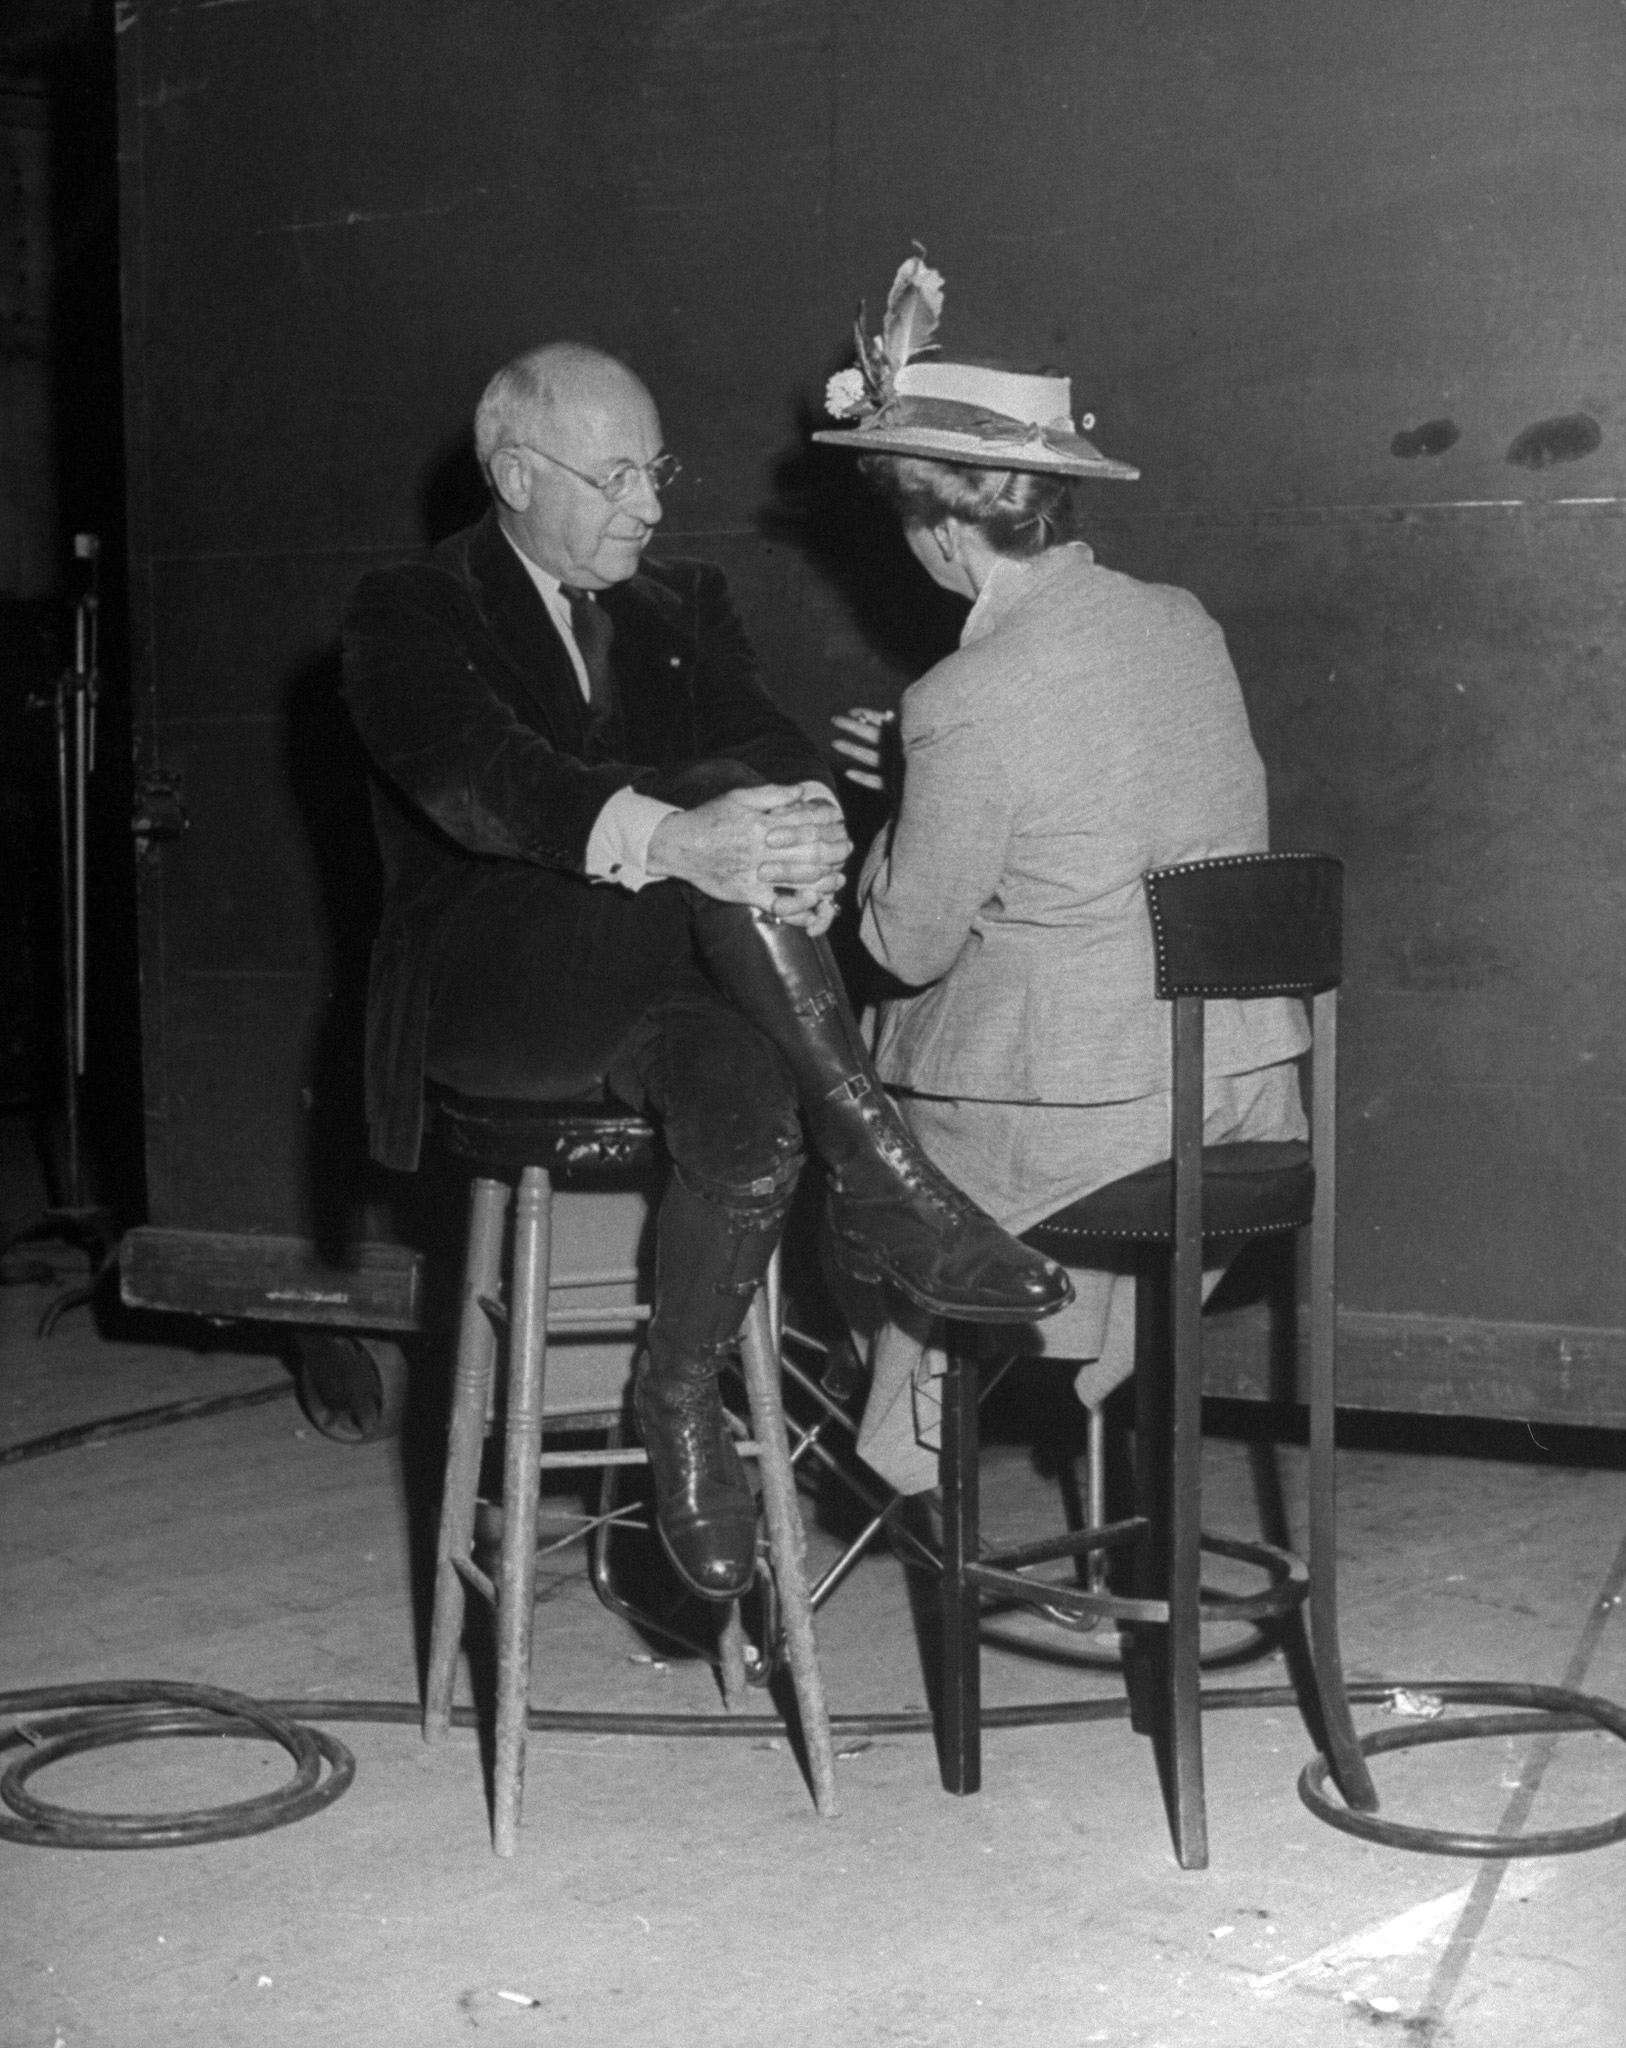 Cecil B. DeMille and Hedda Hopper, sitting down and chatting during the filming of 'Sunset Blvd,' 1949.